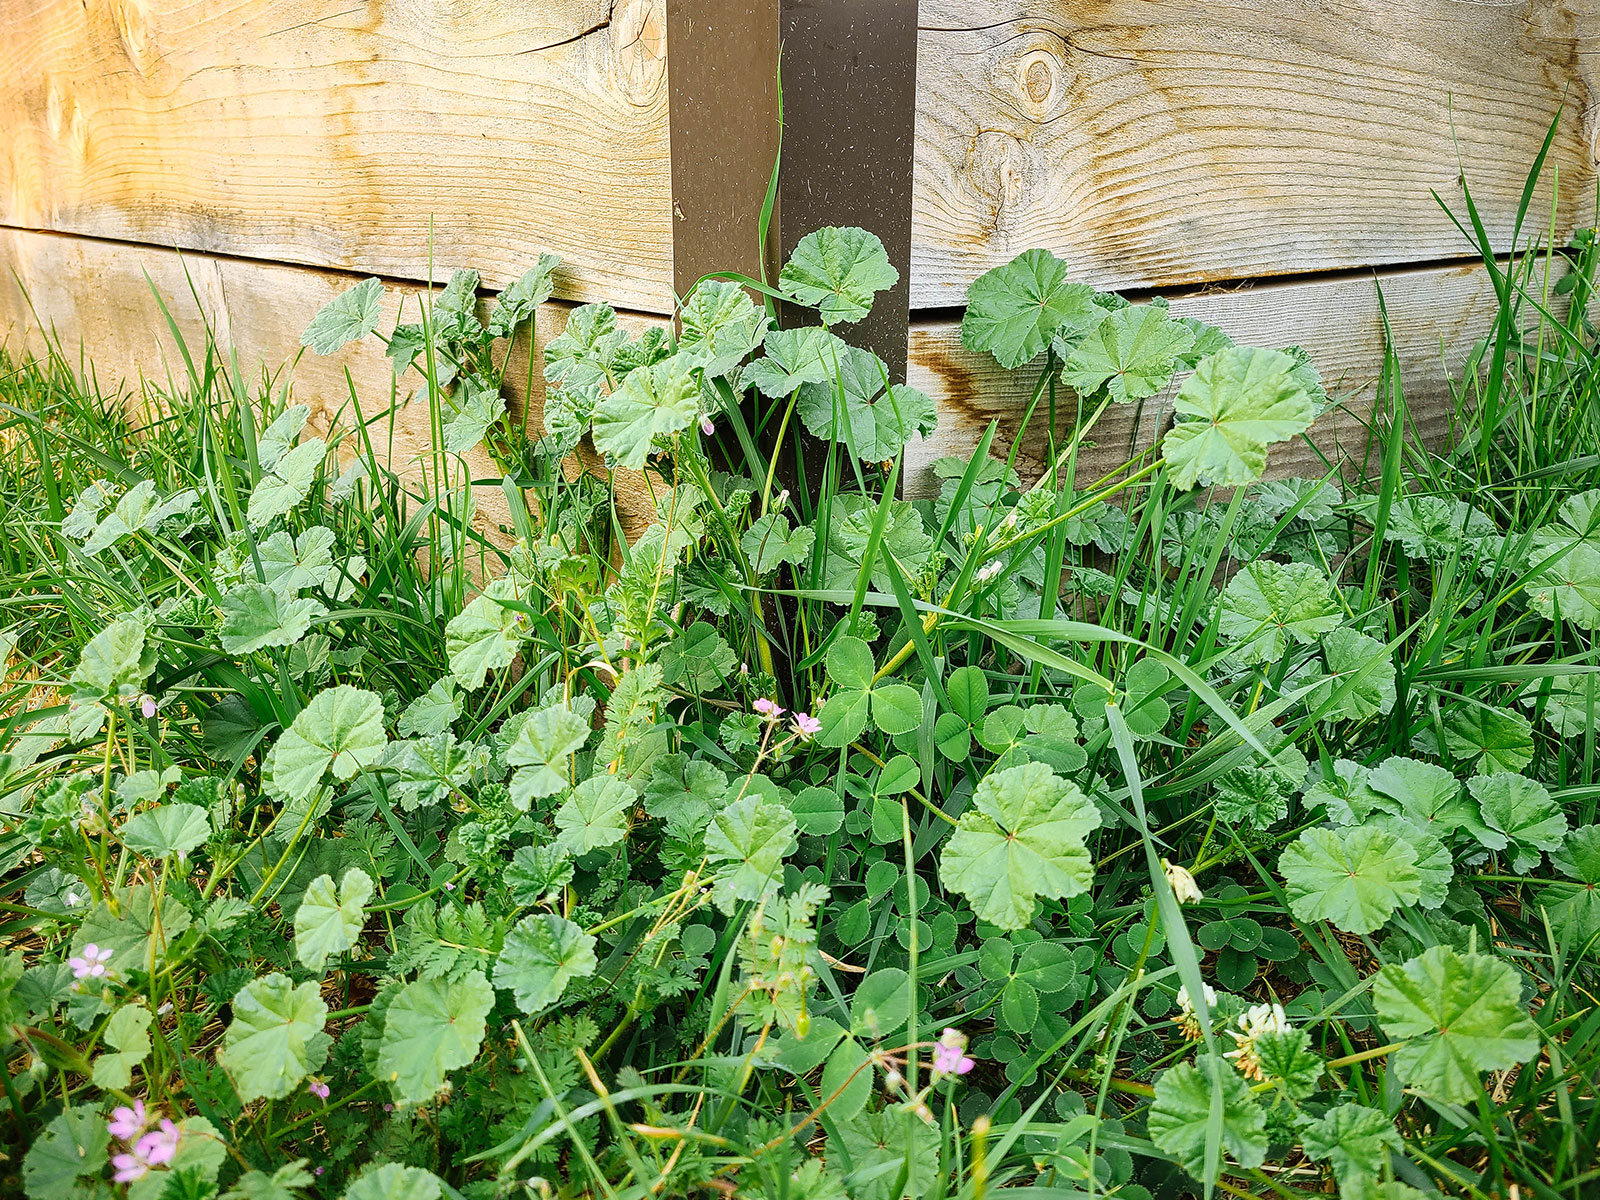 Assorted garden weeds growing in a lawn, including mallow, clover, and storksbill